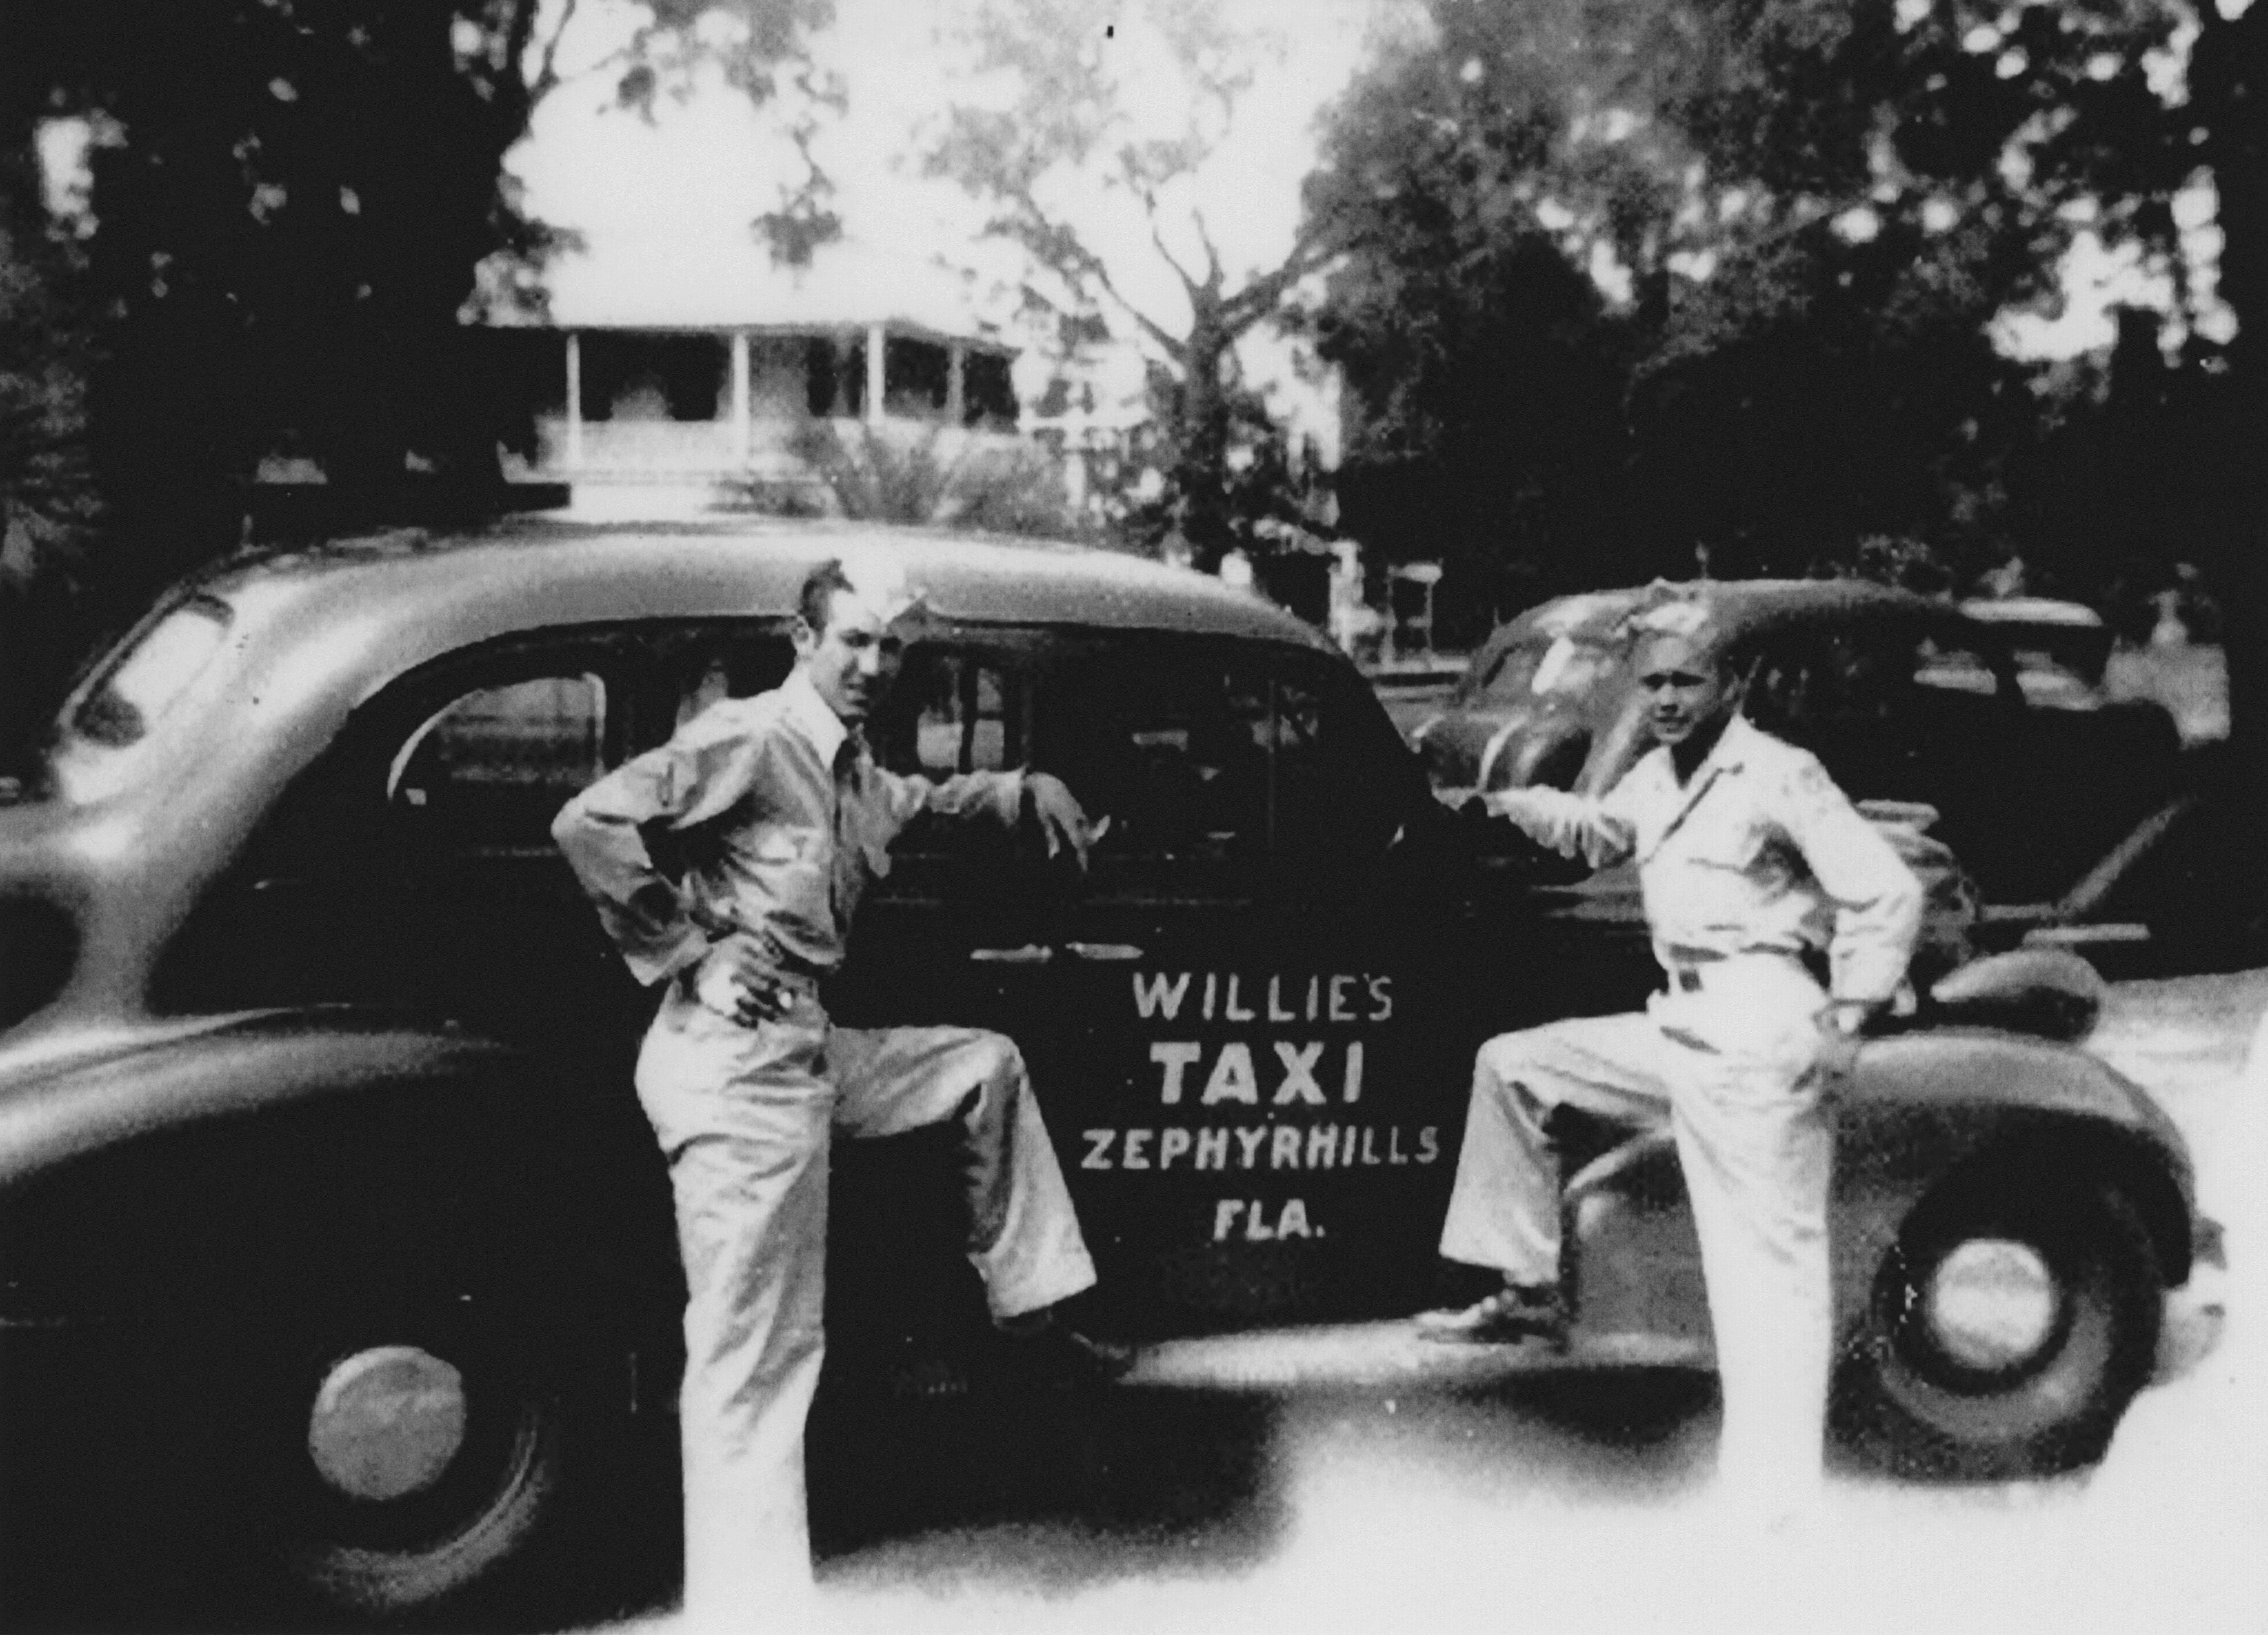 Drivers for Willie's Taxi Service were expected to appear professional while performing their duties.